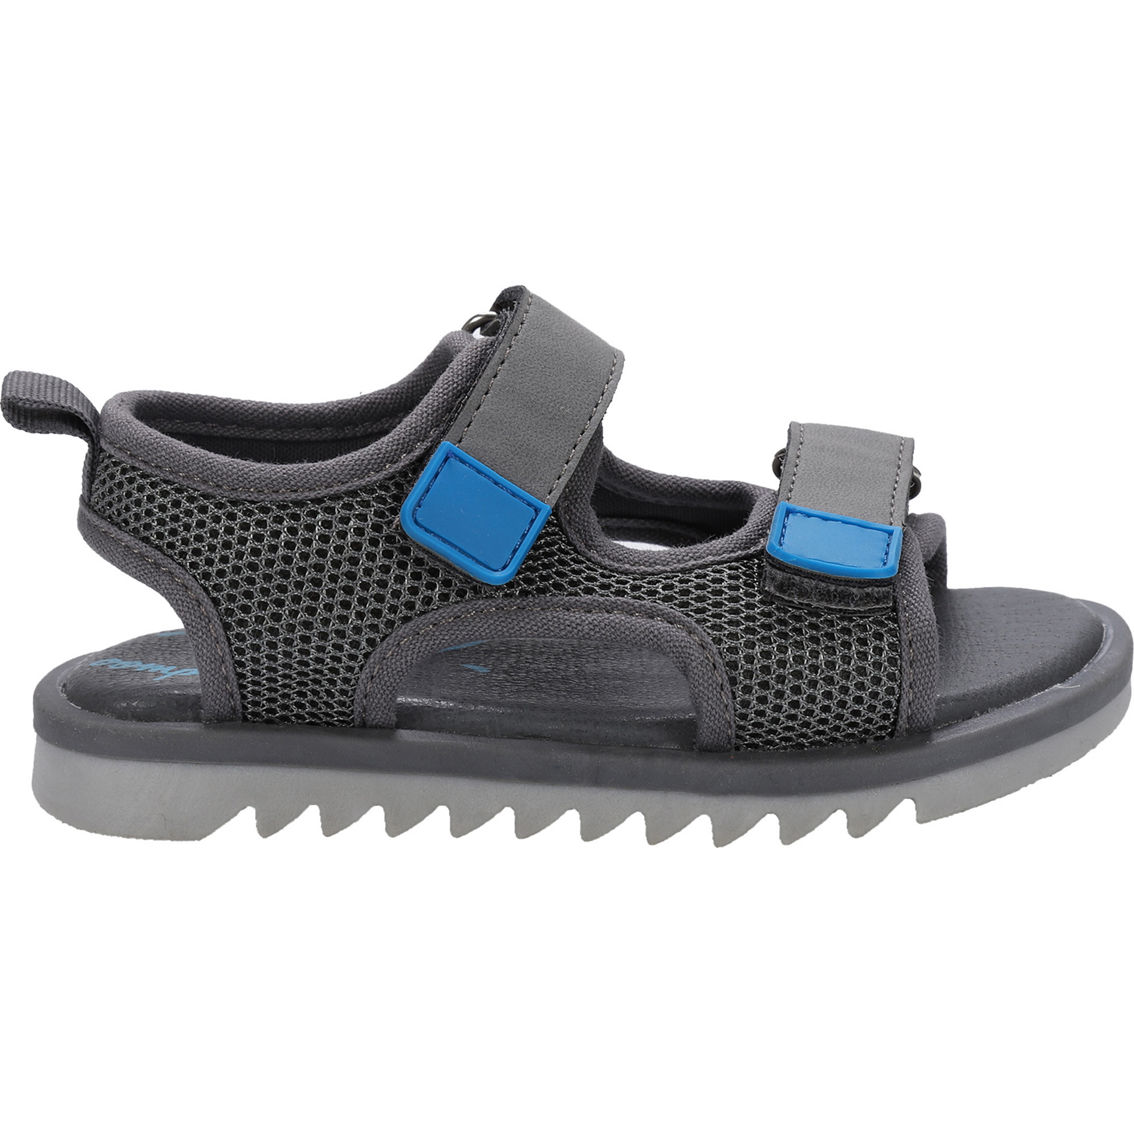 Oomphies Toddler Boys Tide Sandals - Image 2 of 4